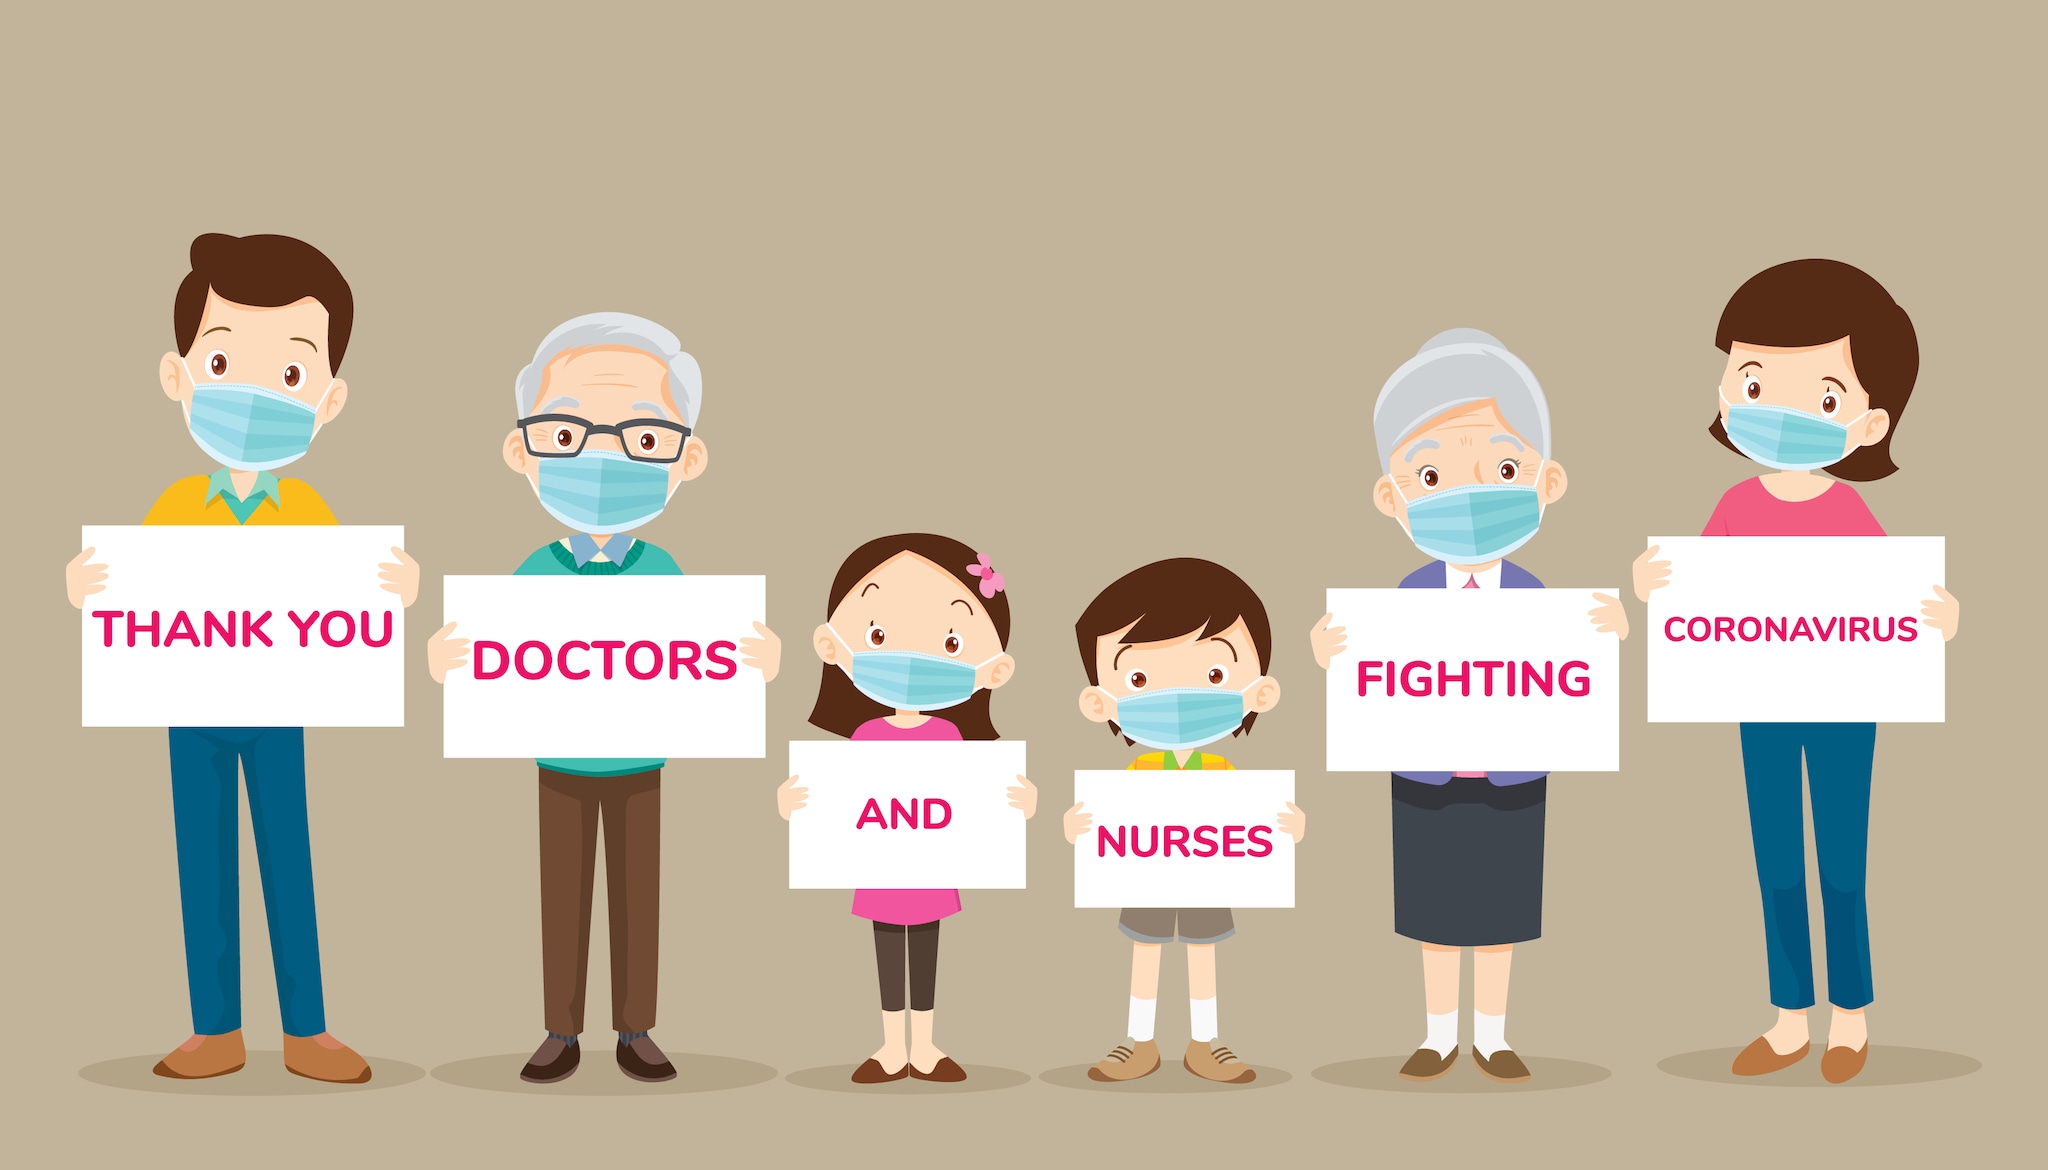 Happy Doctors’ Day 2022: Images, Wishes, Quotes, Messages and WhatsApp Greetings to Share. (Image: Shutterstock)